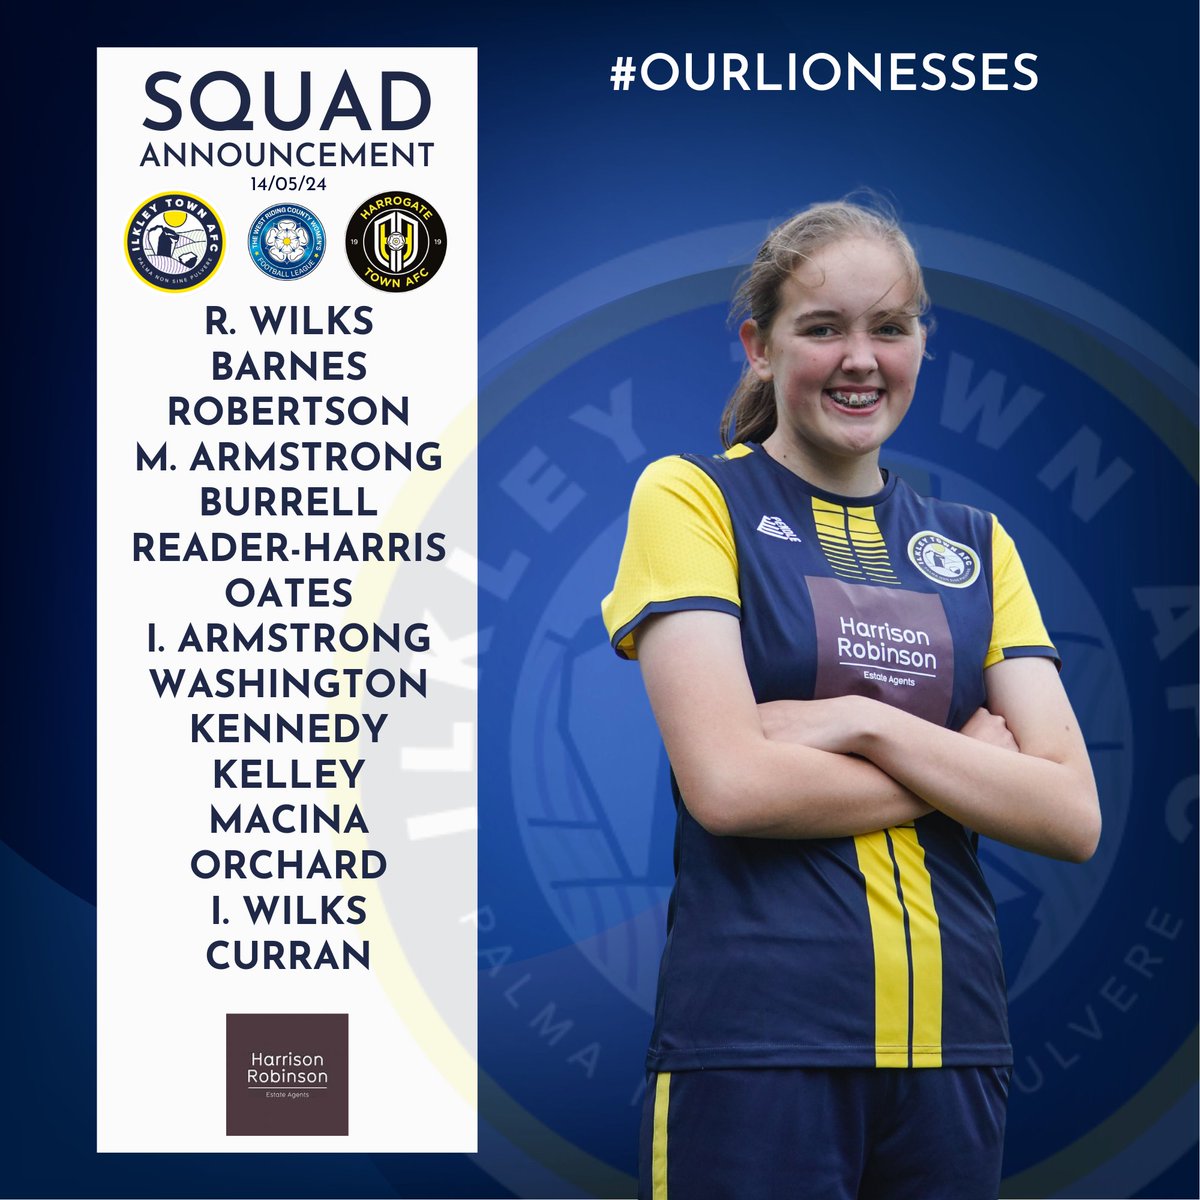 Here’s our squad for tomorrows post season friendly at the MPM Stadium against @NERWFL side @HGTTownWomen It will be a tough, challenging and entertaining game so come on down and support the women’s team! Thanks to our sponsor @hrestateagents #champions #ourlionesses